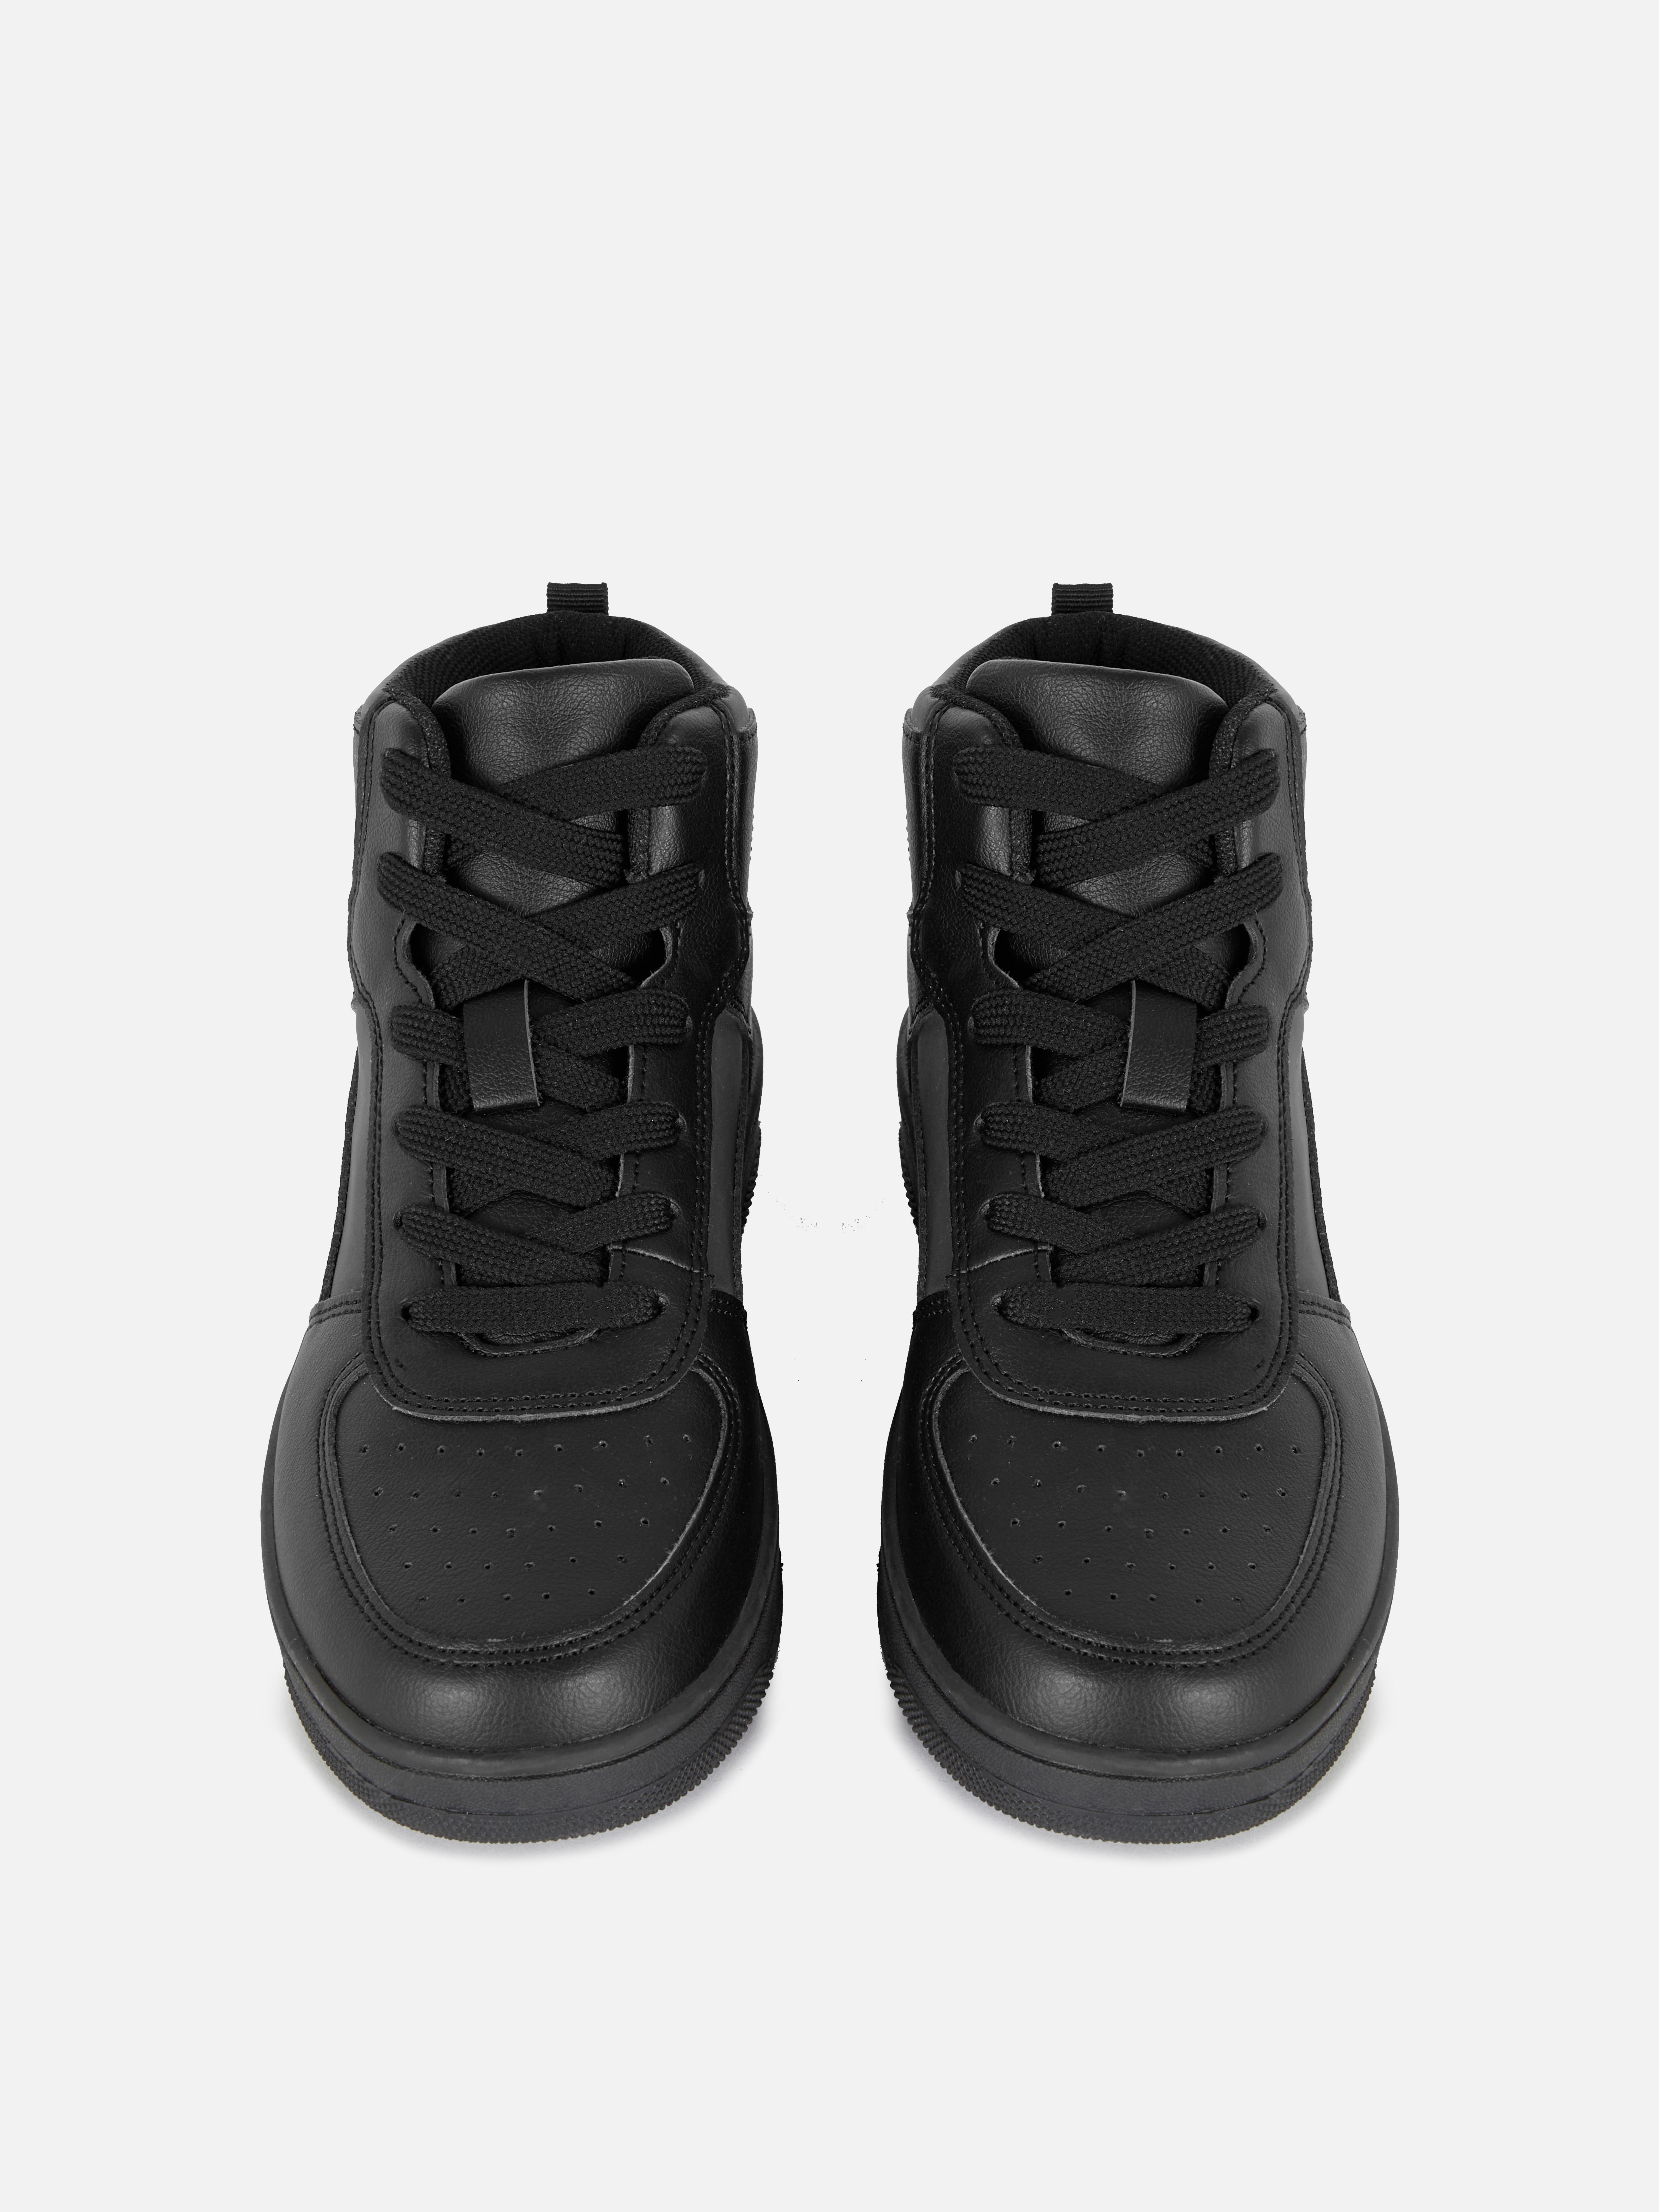 High-Top Trainer Boots